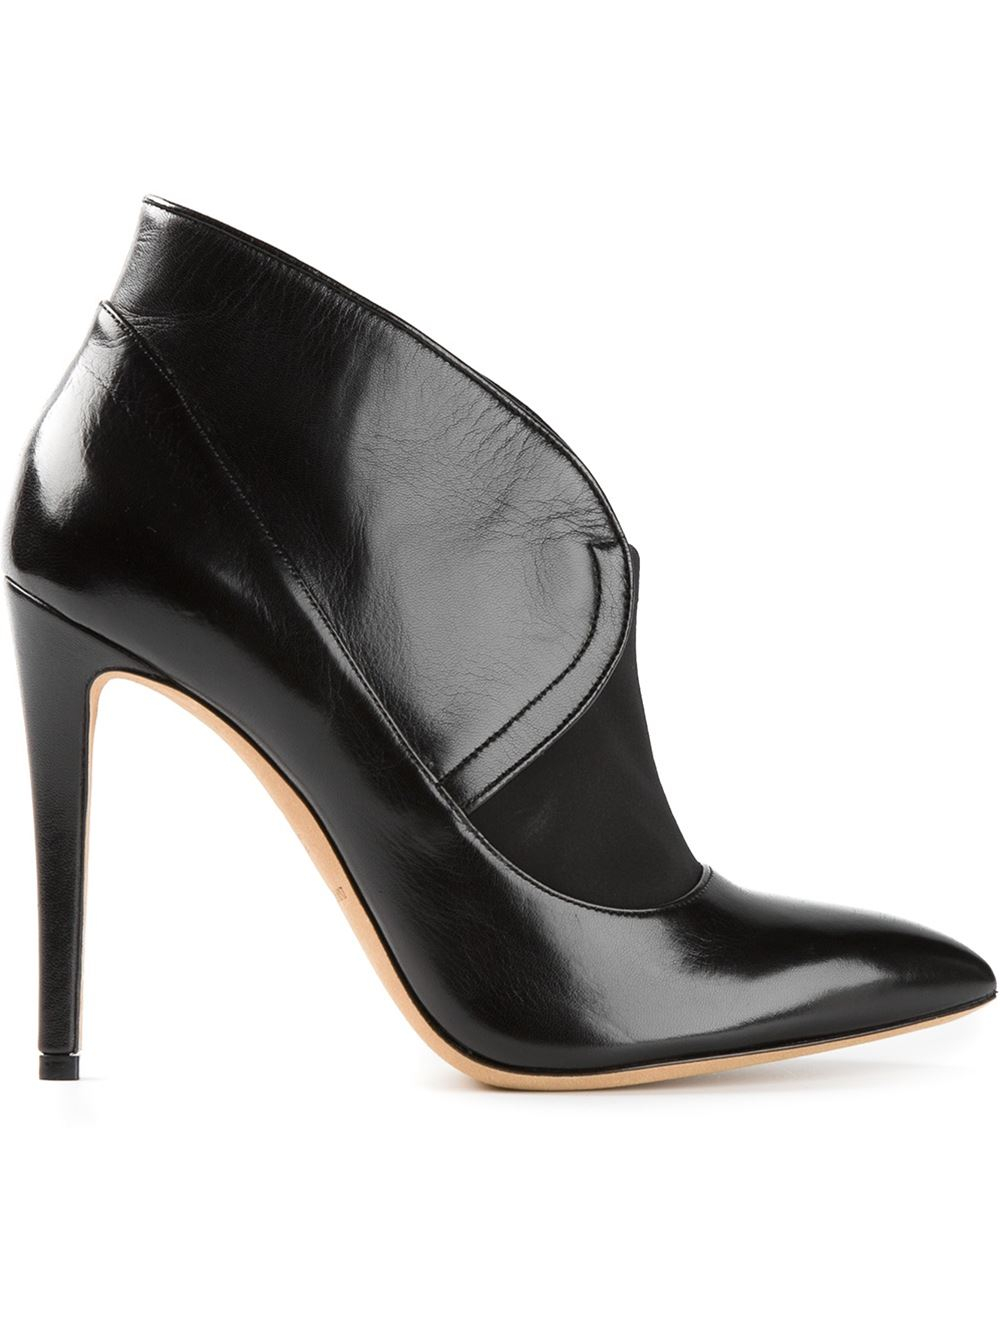 Lyst - Emporio Armani Pointed Toe Ankle Boots in Black